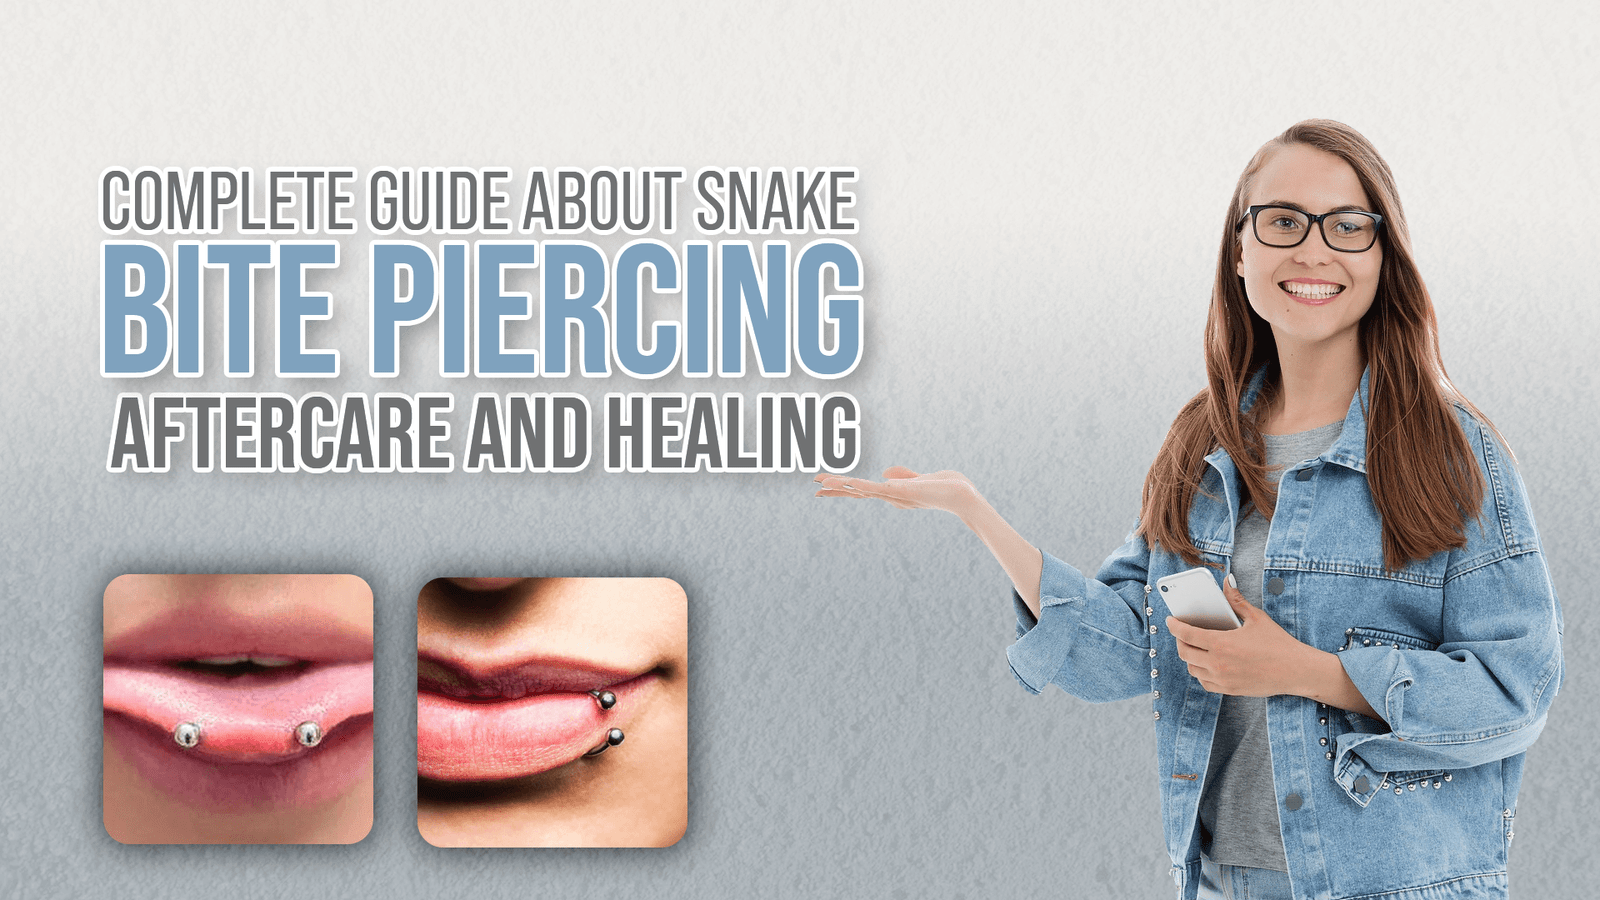 Complete Guide About Snake Bite Piercing – Aftercare and Healing